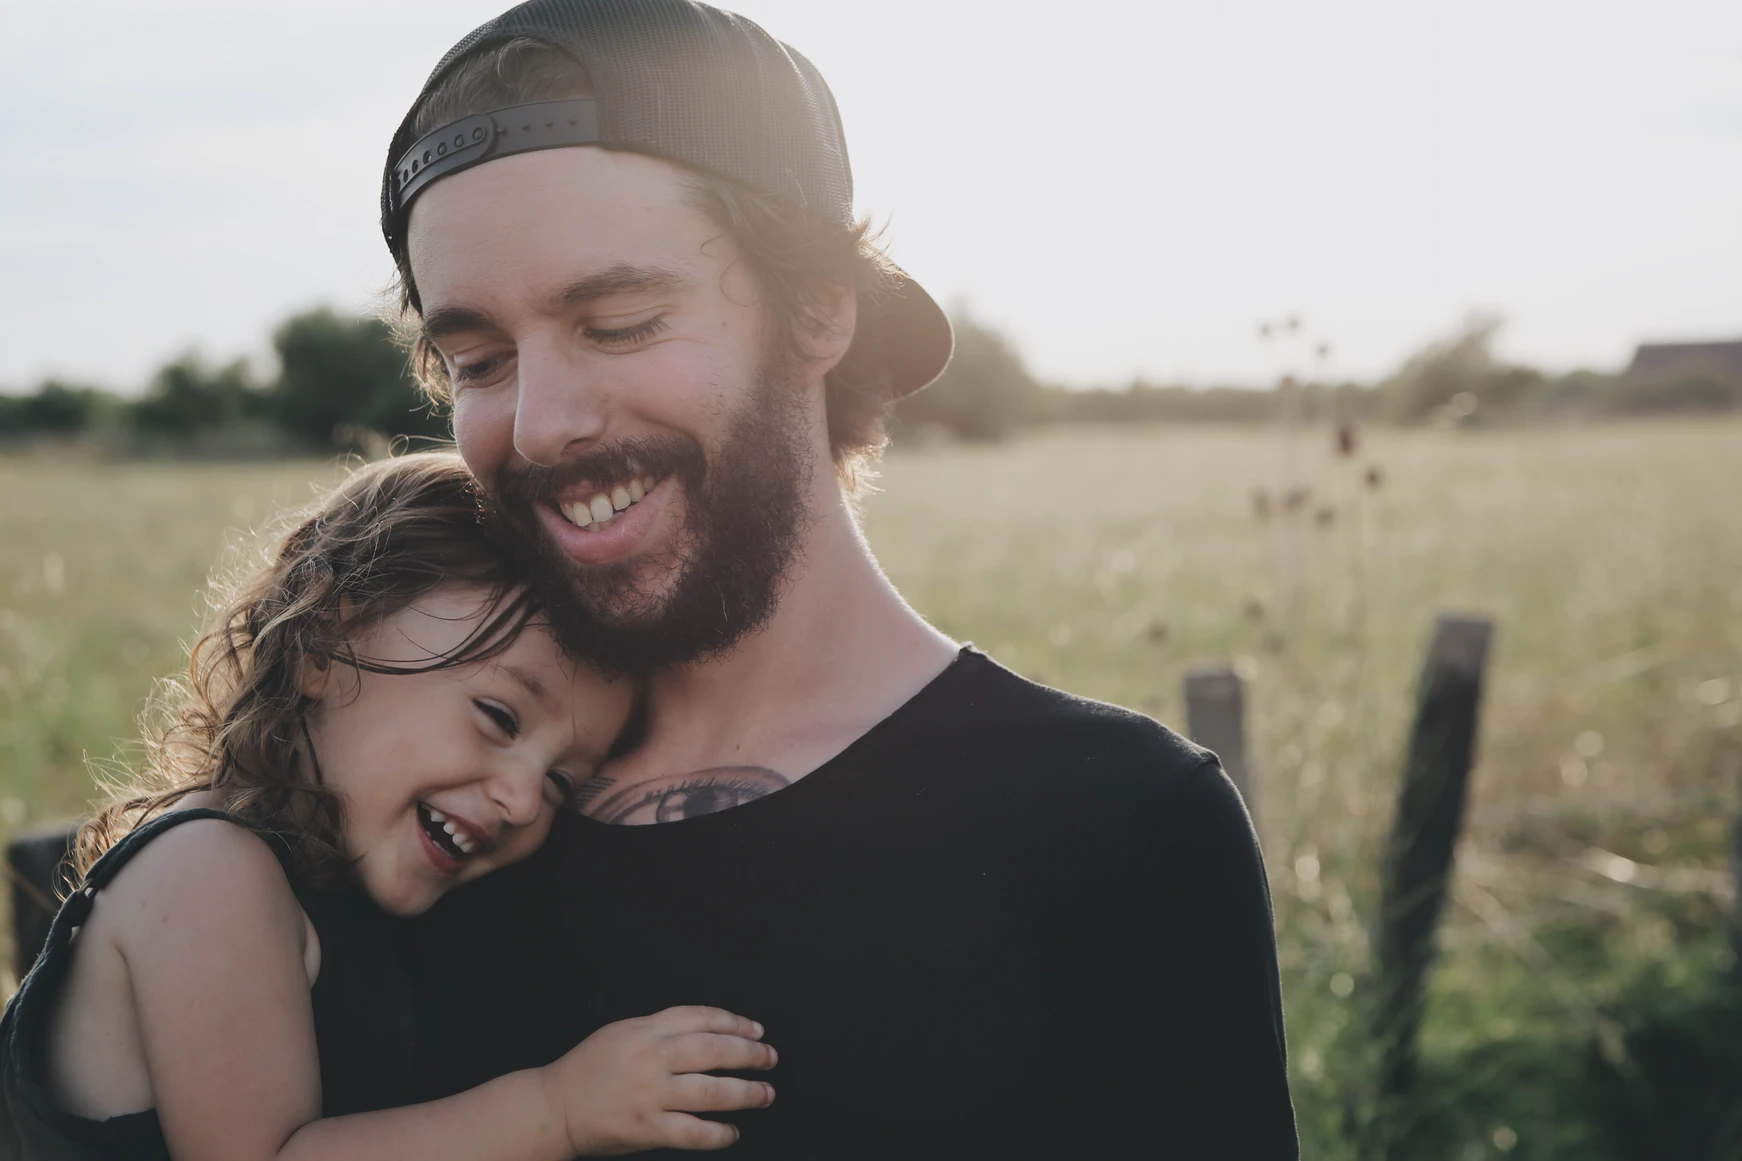 A candid photo of a father hugging his little girl. | Source: Unsplash